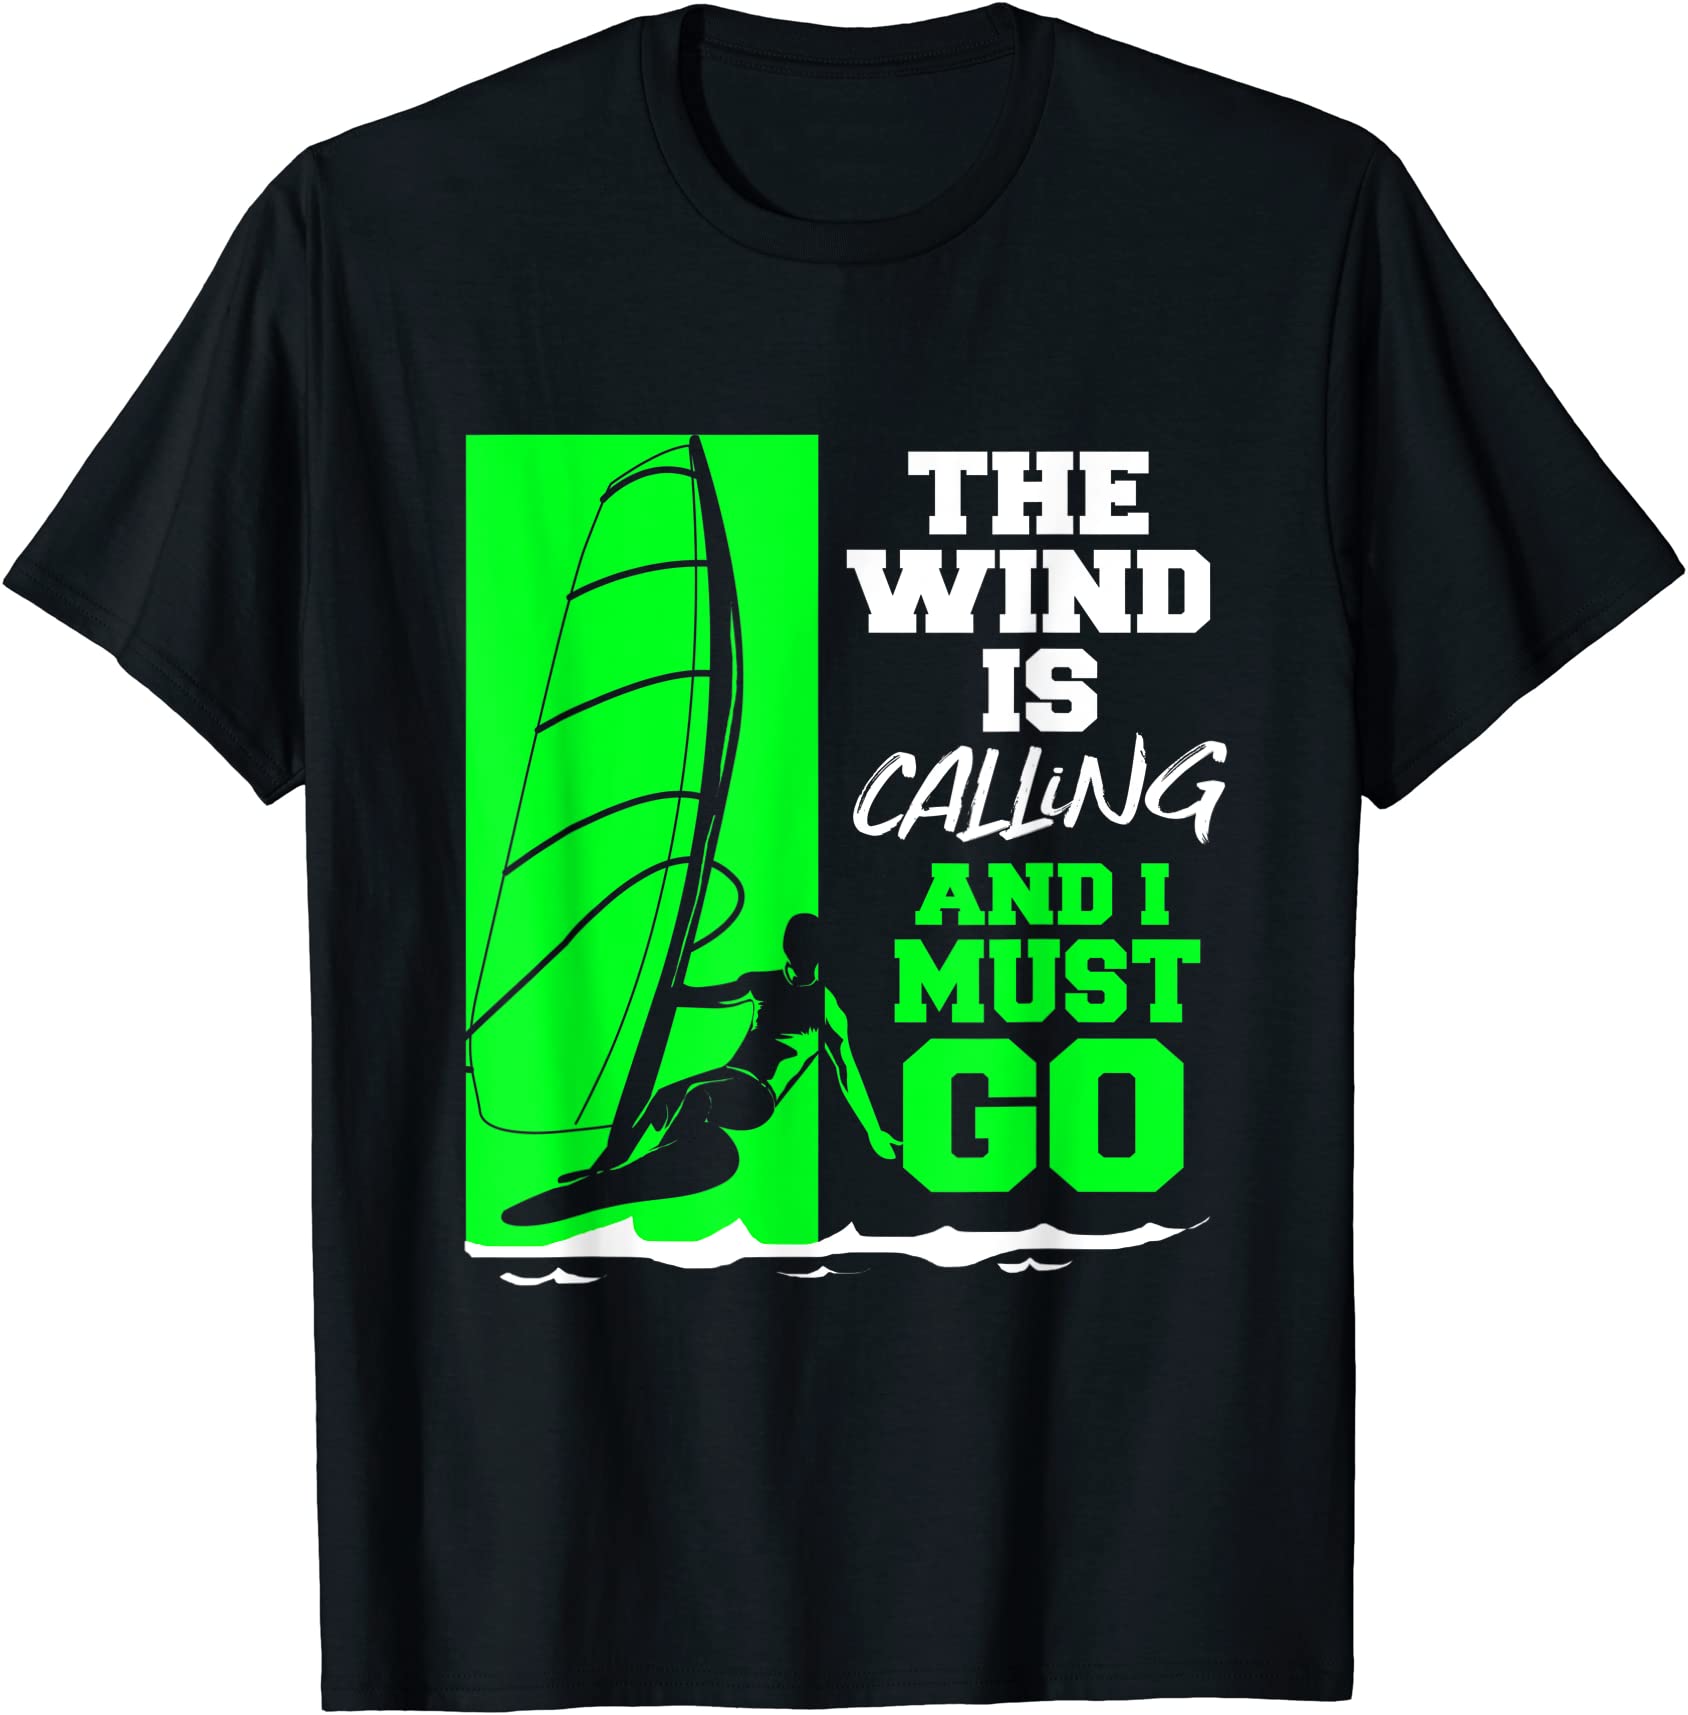 the wind is calling and i must go windsurfing t shirt men - Buy t-shirt ...